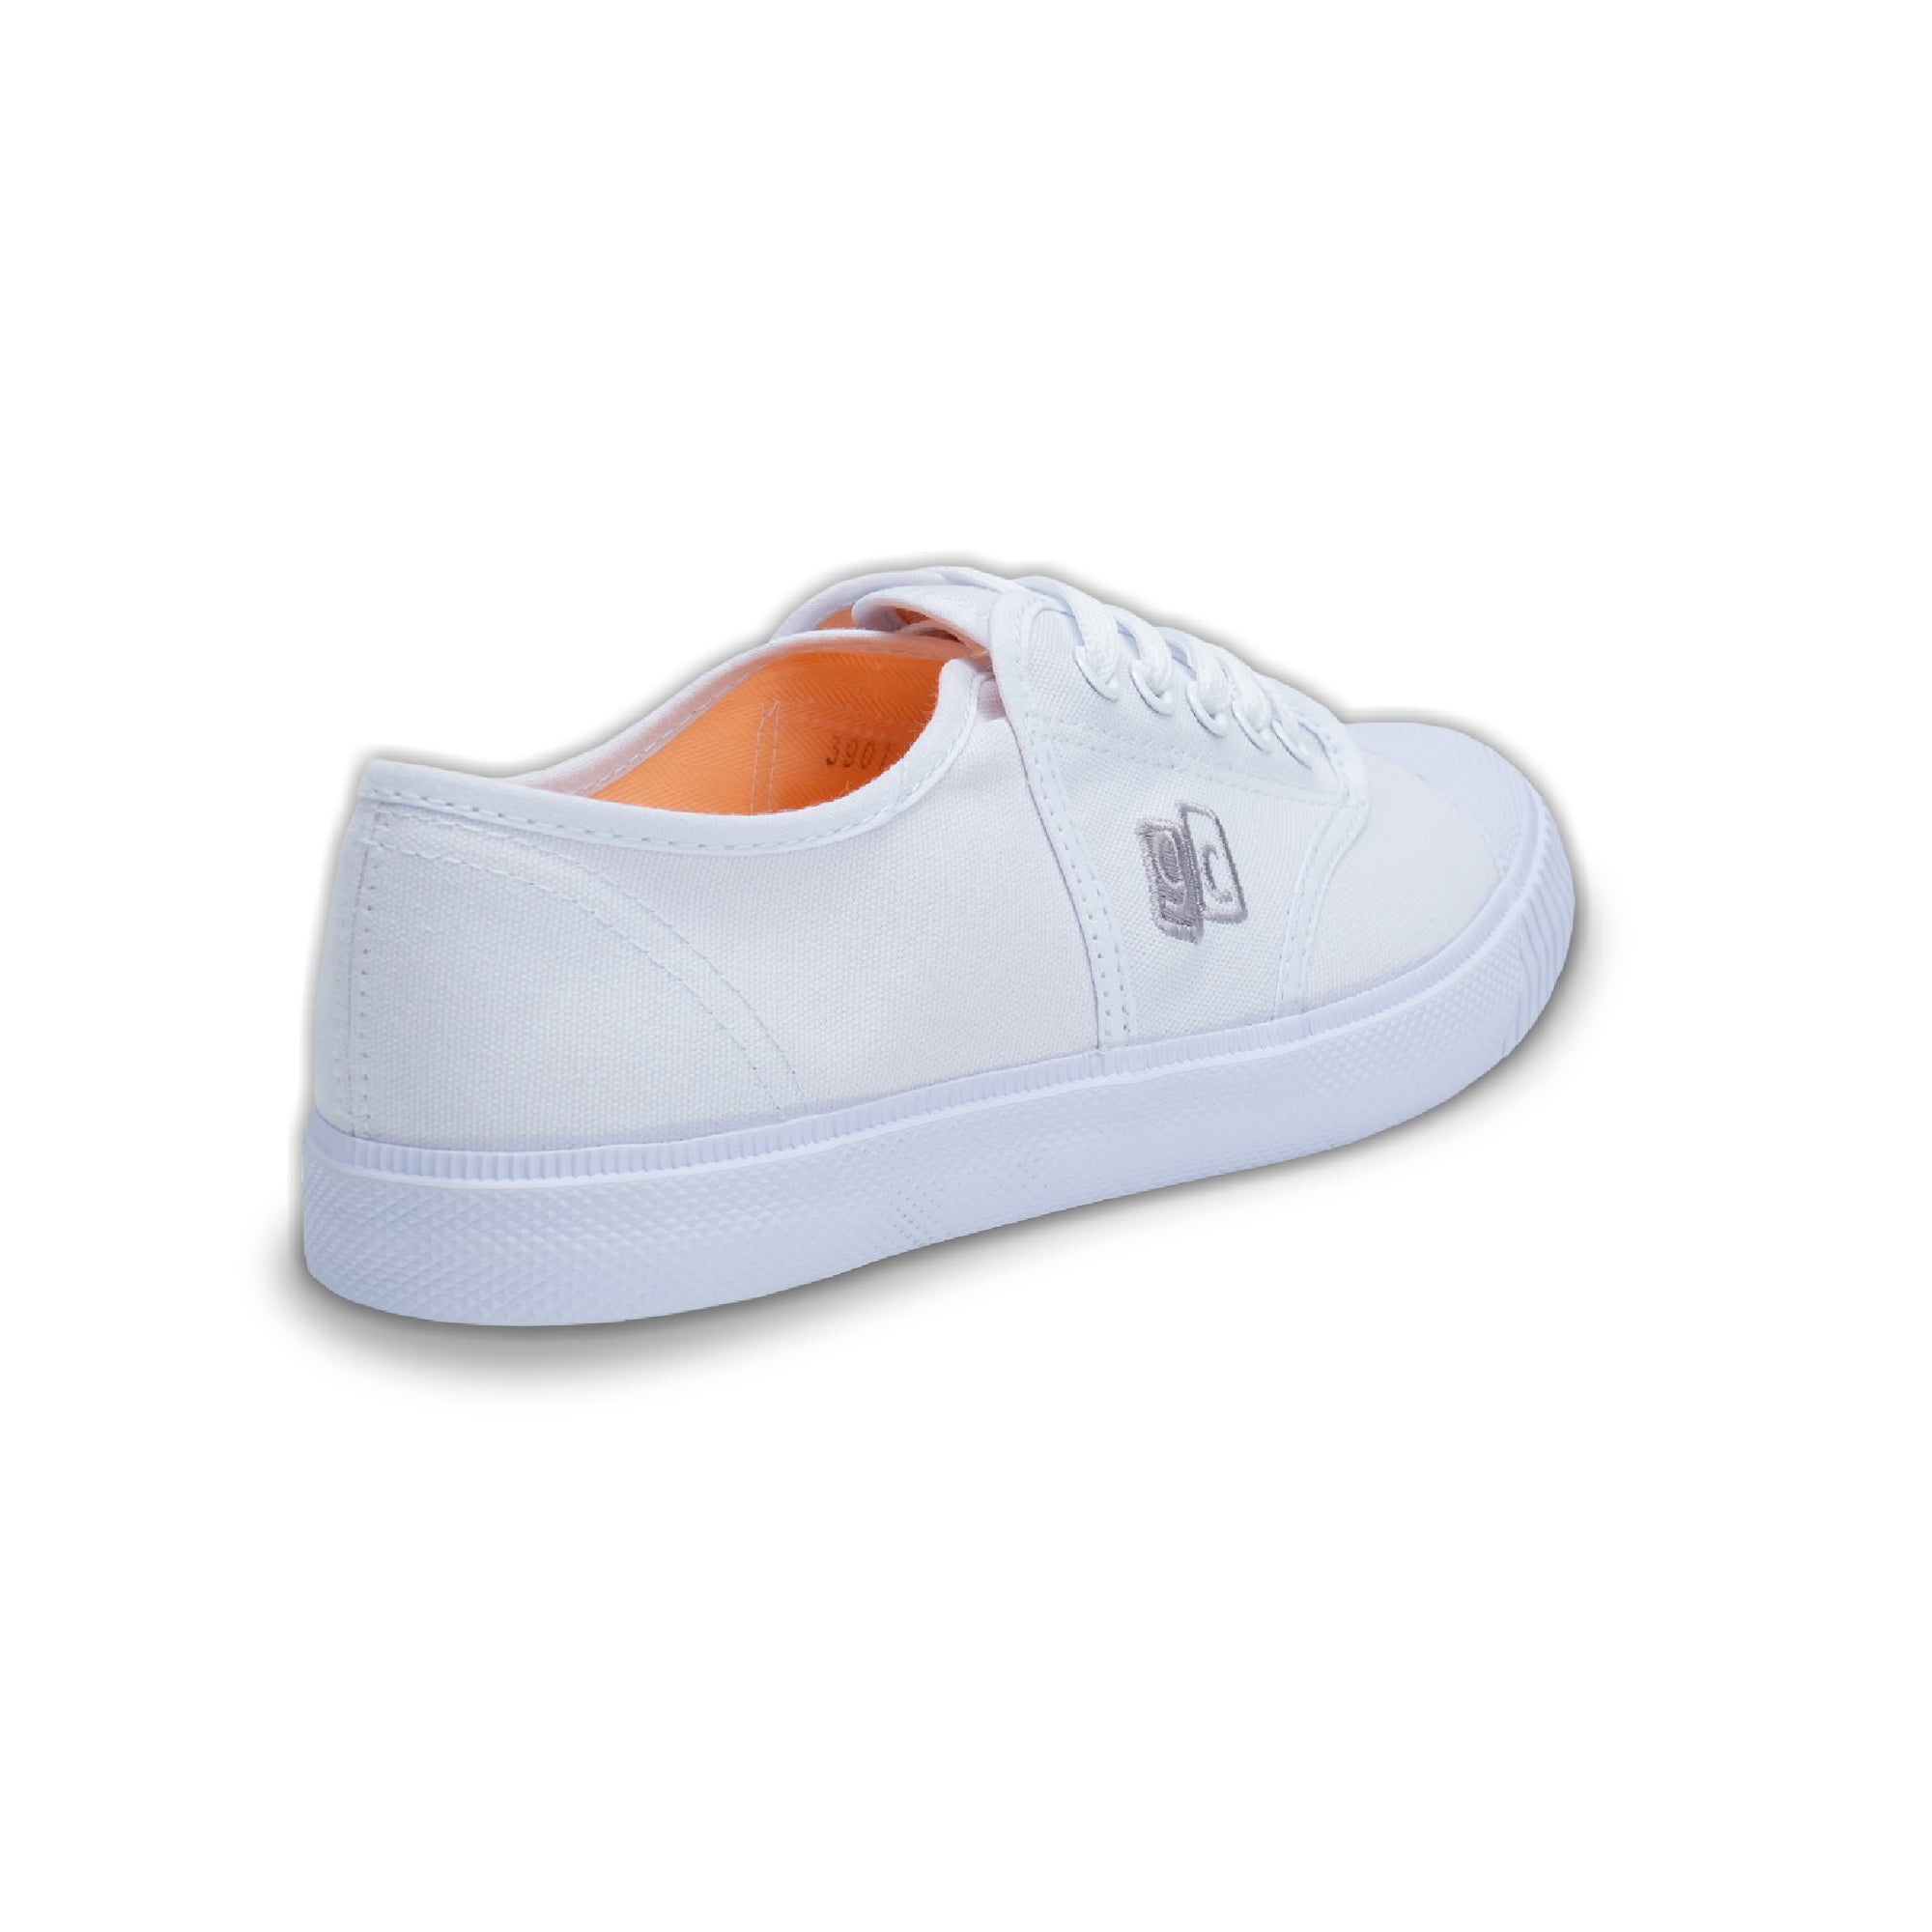 Student shoes, durable, soft, sticky, model GT333